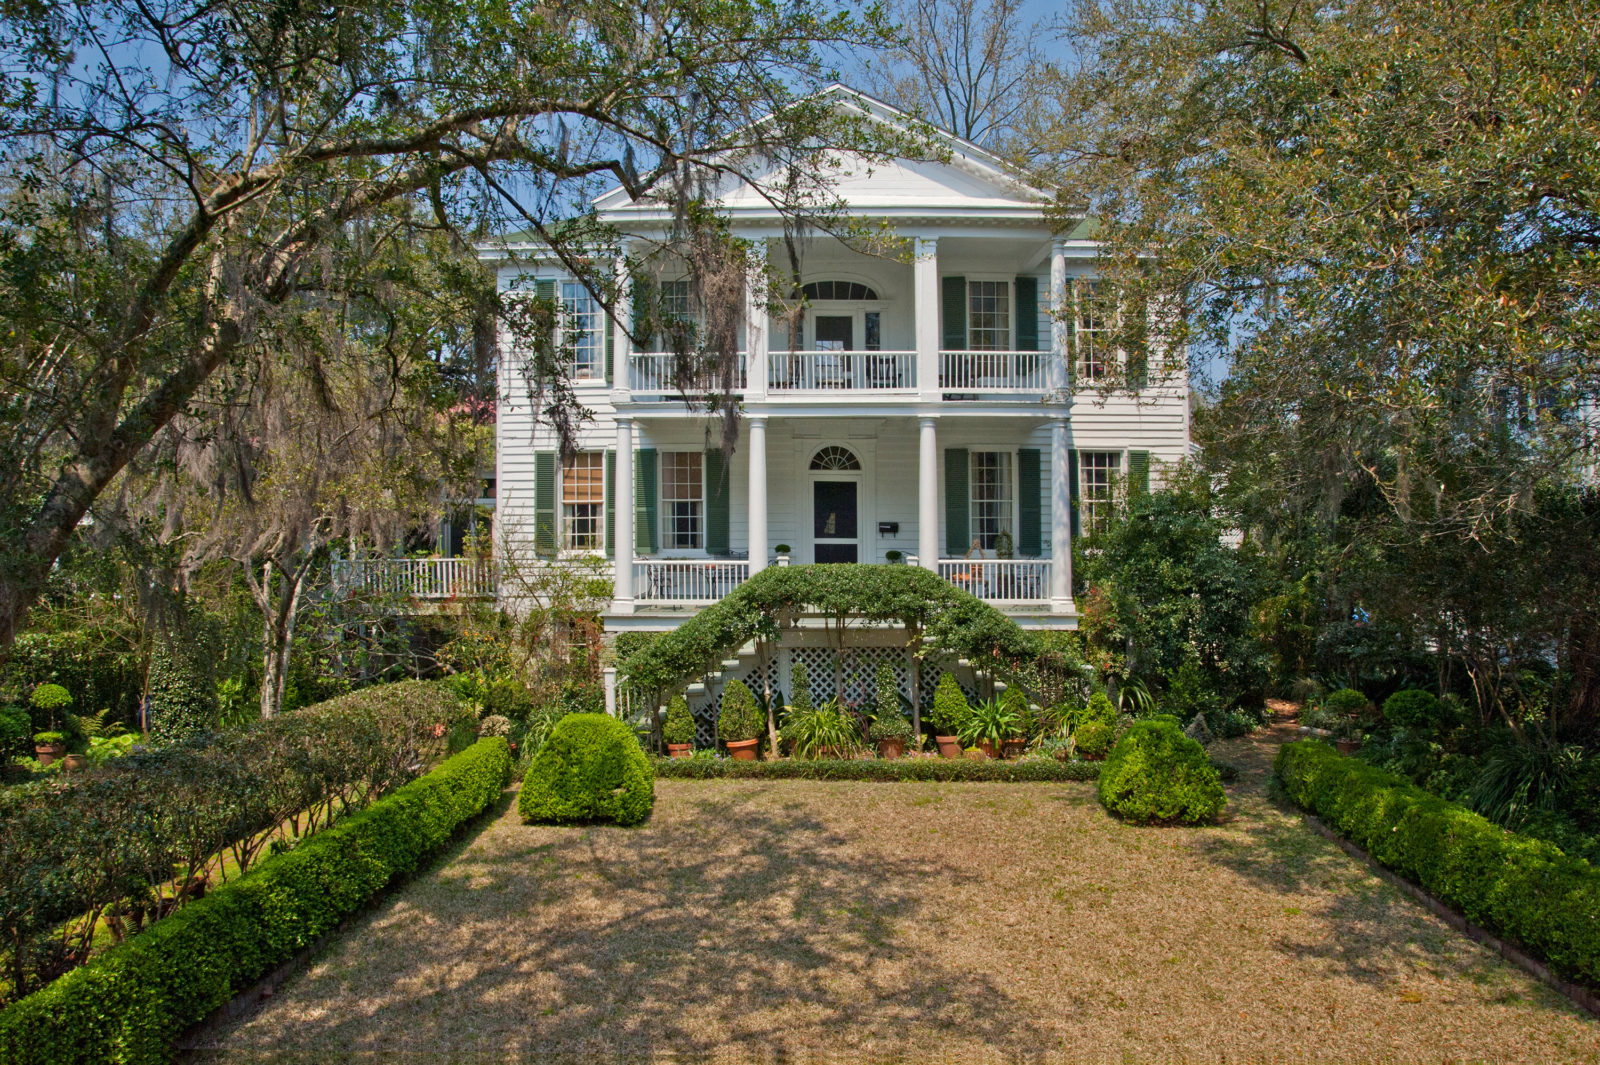 weekend-agenda-tour-historic-homes-in-beaufort-south-carolina